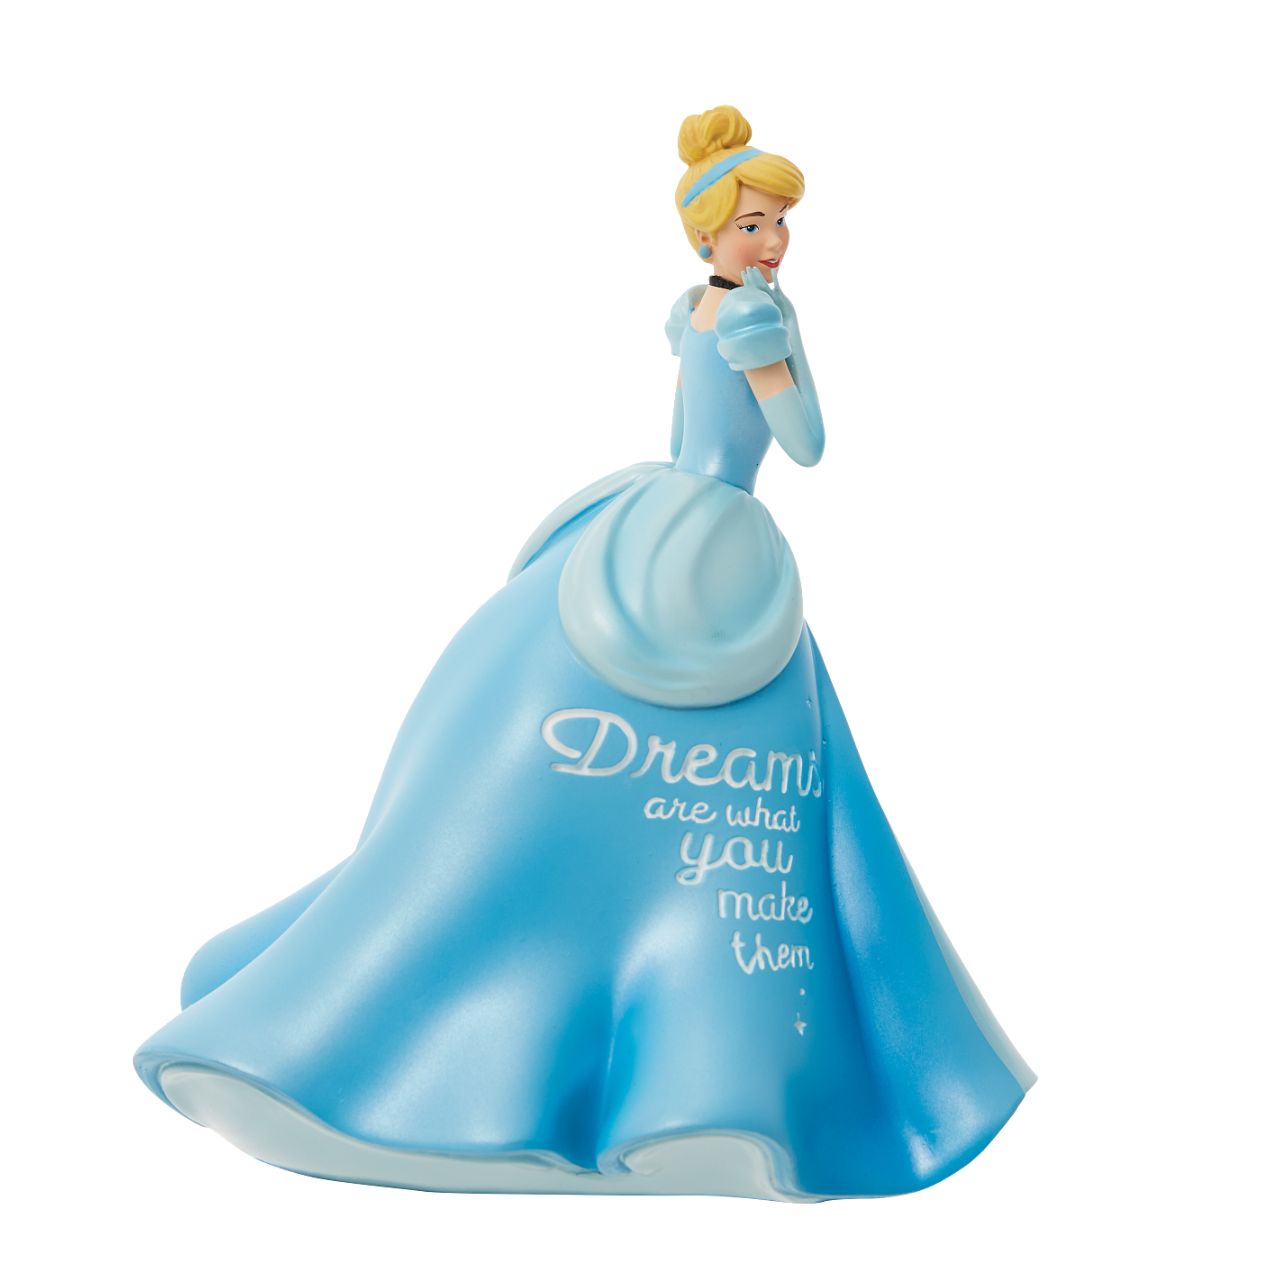 Disney Cinderella Princess Expression Figurine  Cinderella Princess Expression Figurine. Each piece is hand painted and slight colour variations are to be expected which makes each piece unique. Supplied in branded gift box. Not a toy or children's product. Intended for adults only.